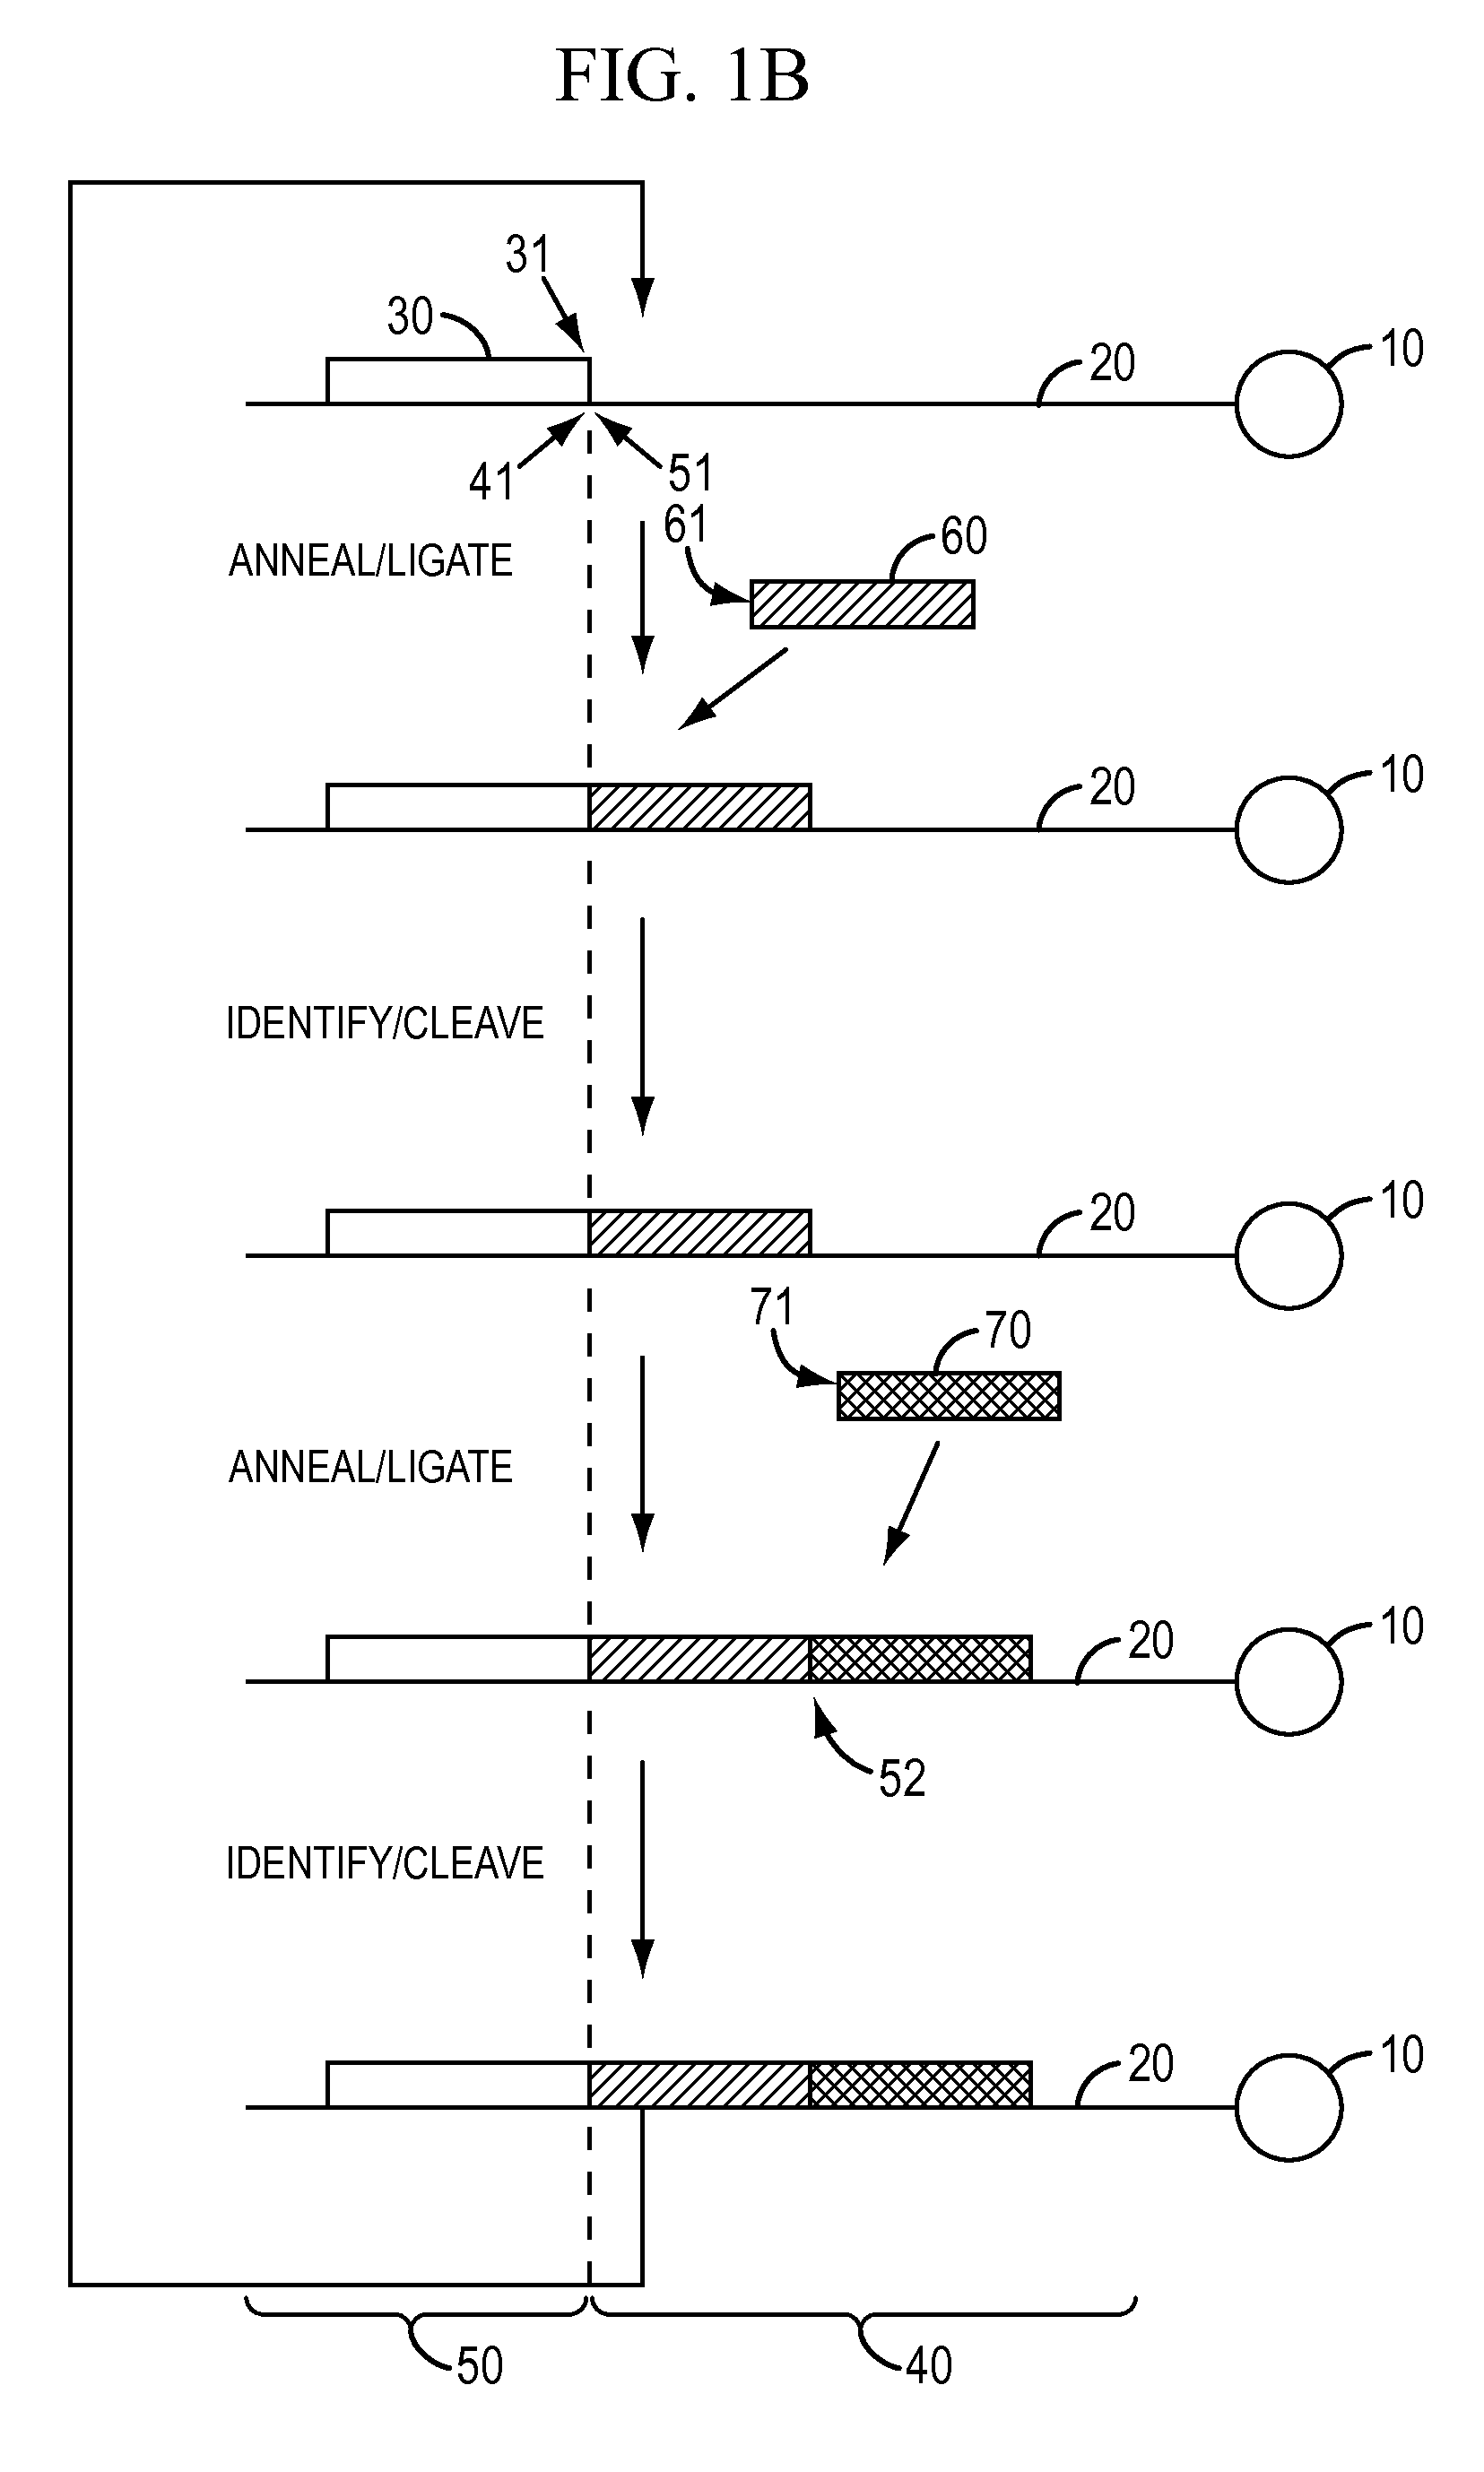 Reagents, methods, and libraries for bead-based sequencing